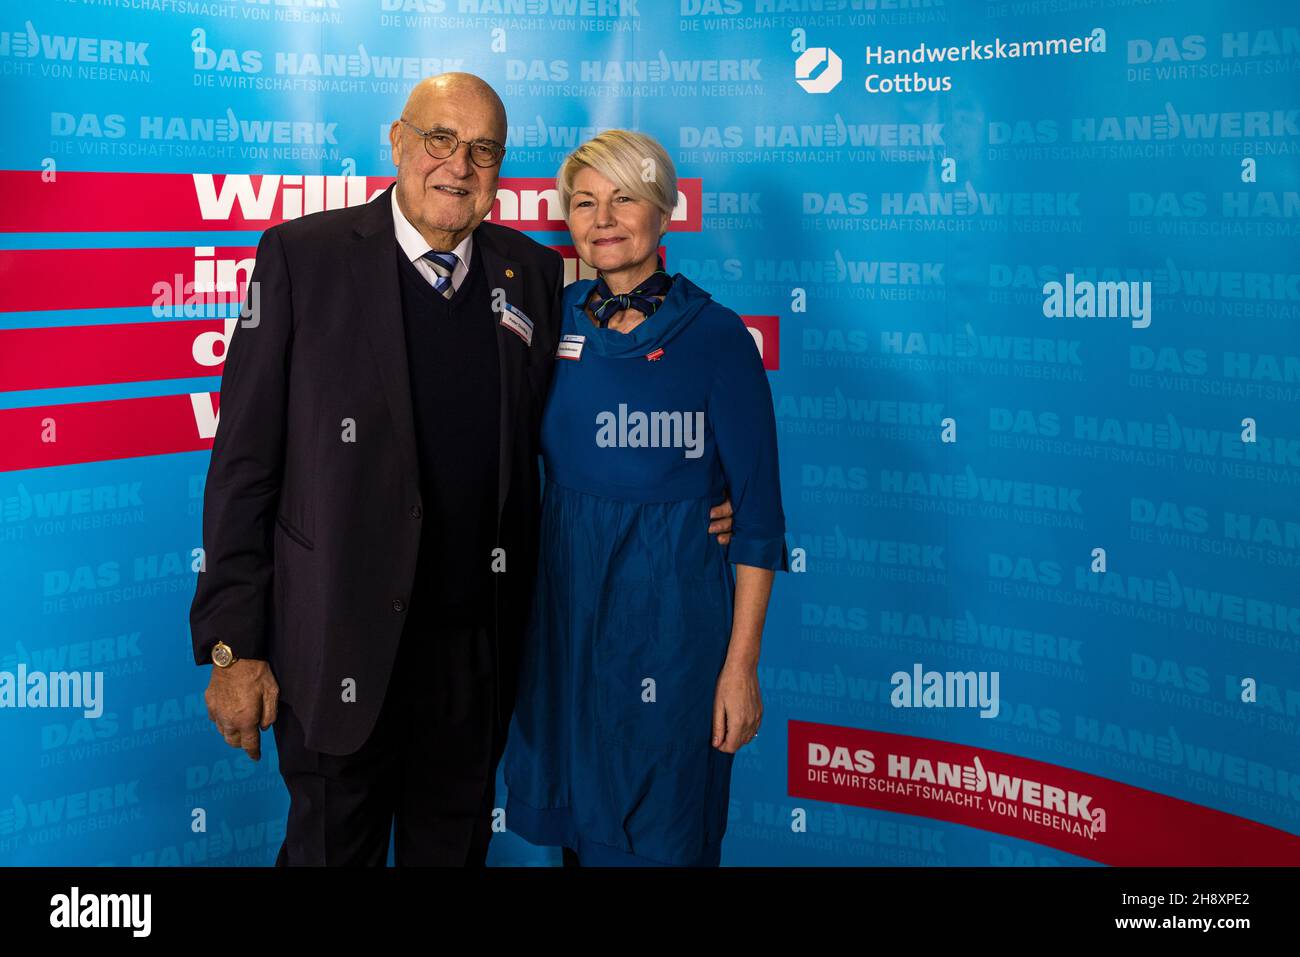 Cottbus, Germany. 02nd Dec, 2021. Corina Reifenstein, entrepreneur and civil engineer, stands with Peter Dreißig, former president of the Cottbus Chamber of Skilled Crafts. Reifenstein was elected as the new chairwoman at this year's general meeting. This was the first time that the members elected a woman to head the South Brandenburg skilled crafts sector. Credit: Frank Hammerschmidt/dpa/Alamy Live News Stock Photo